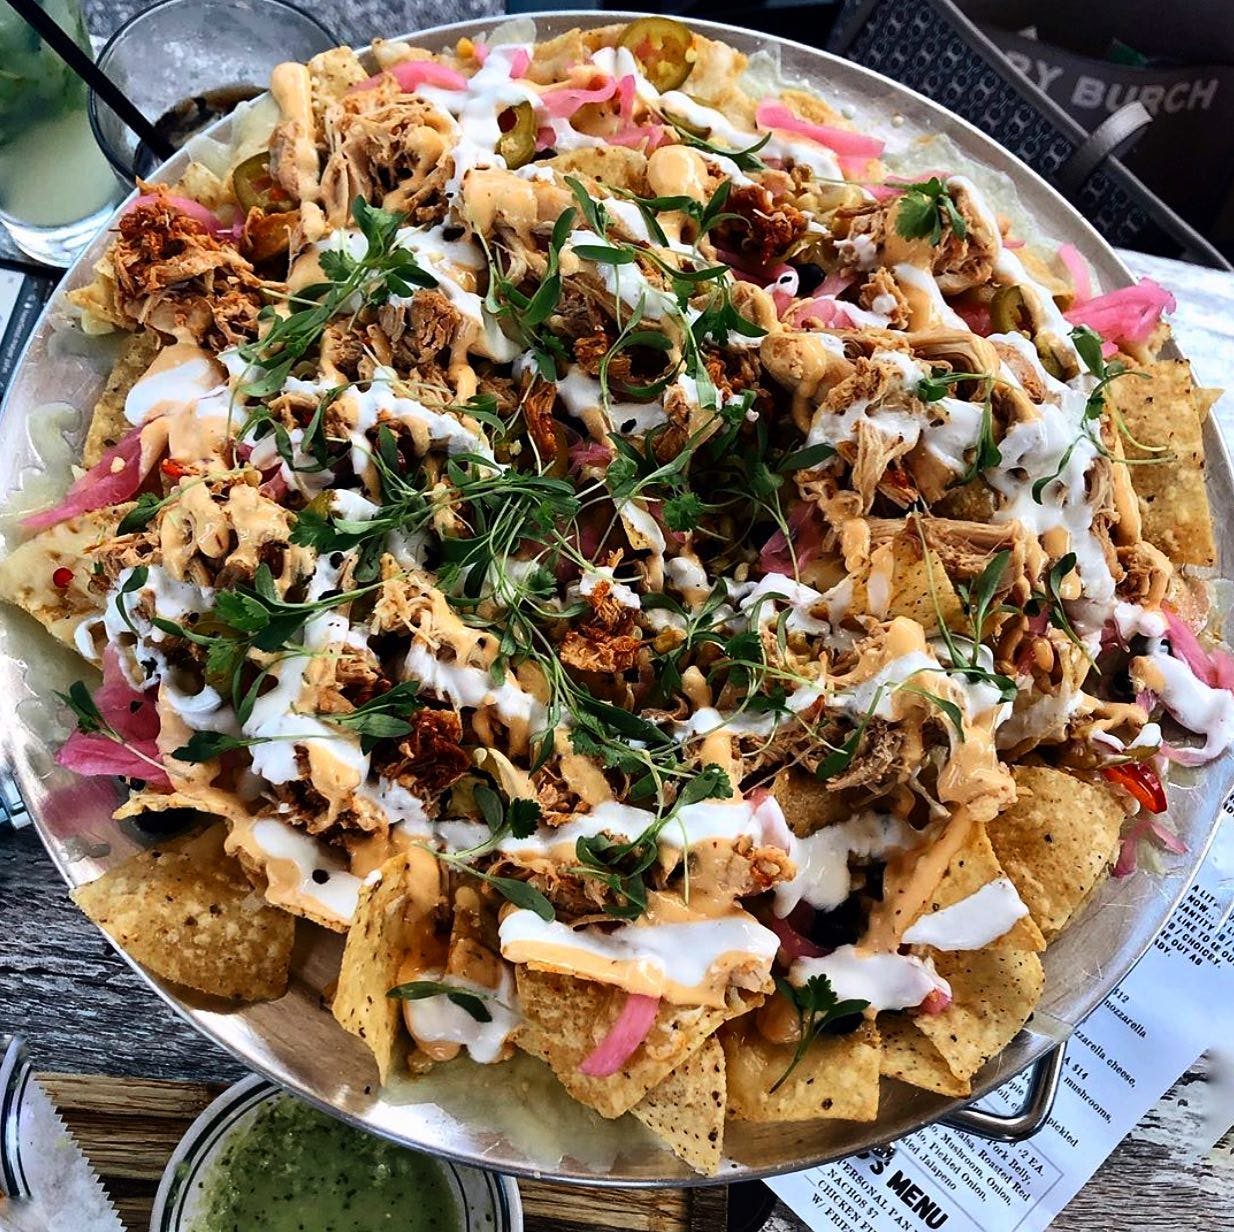 How much would you pay for these al pastor fries? #alpastor #loadedfri